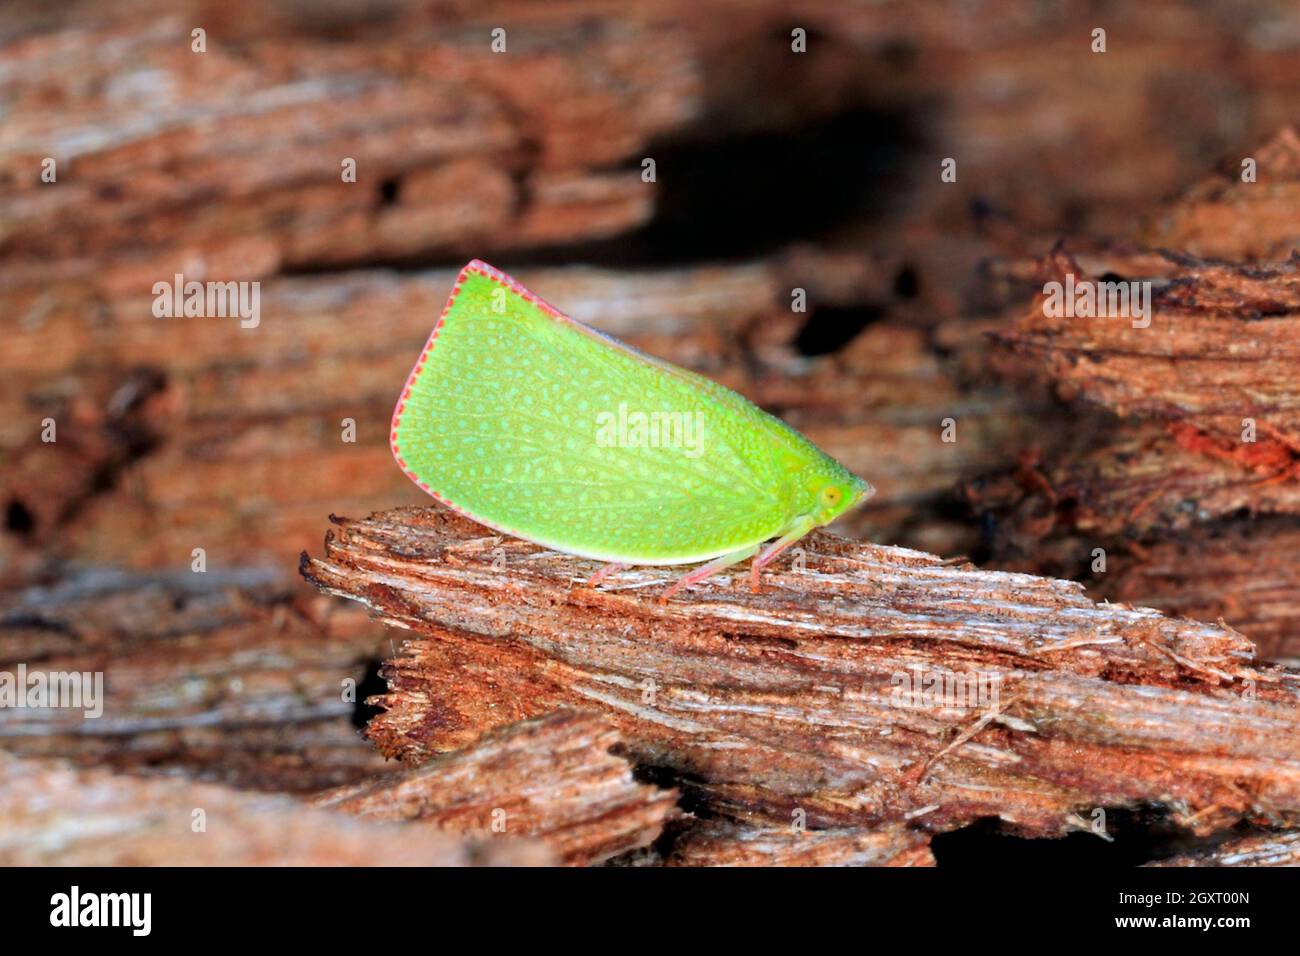 Green Mottled Planthopper, Siphanta hebes or Siphanta acuta. Also known as Common Green Planthopper and Torpedo Bug. Coffs Harbour, NSW, Australia Stock Photo